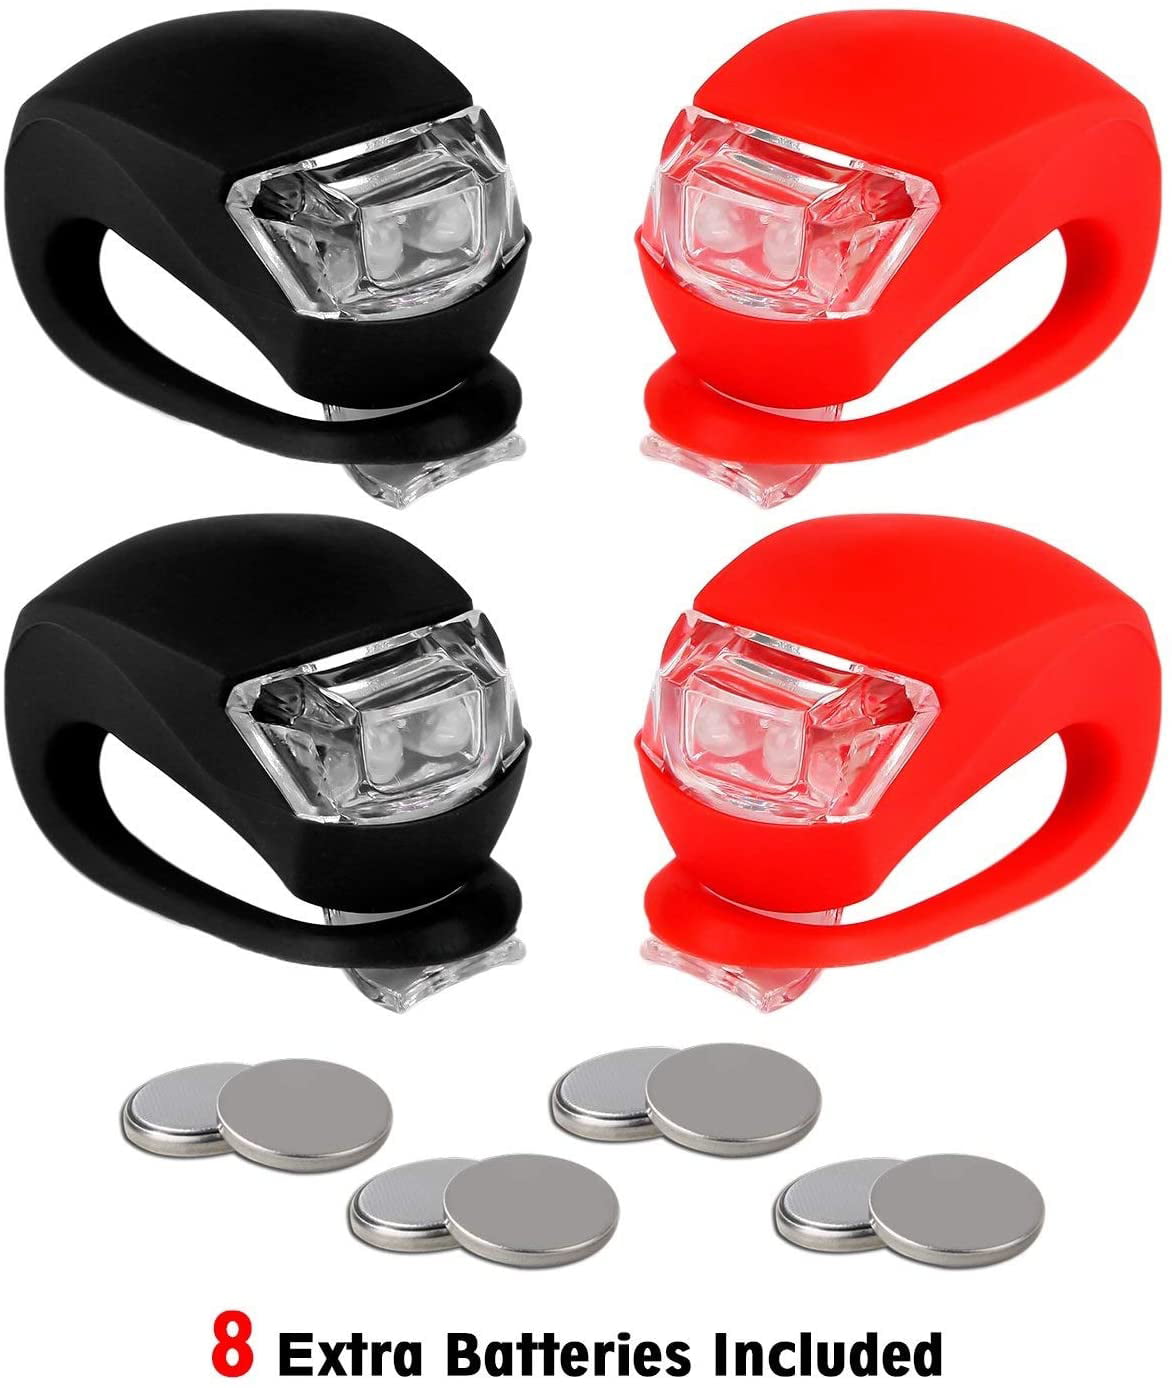 2Pcs Silicone Bicycle Bike Cycle Safety LED Head Front & Rear Tail Light PRUK 